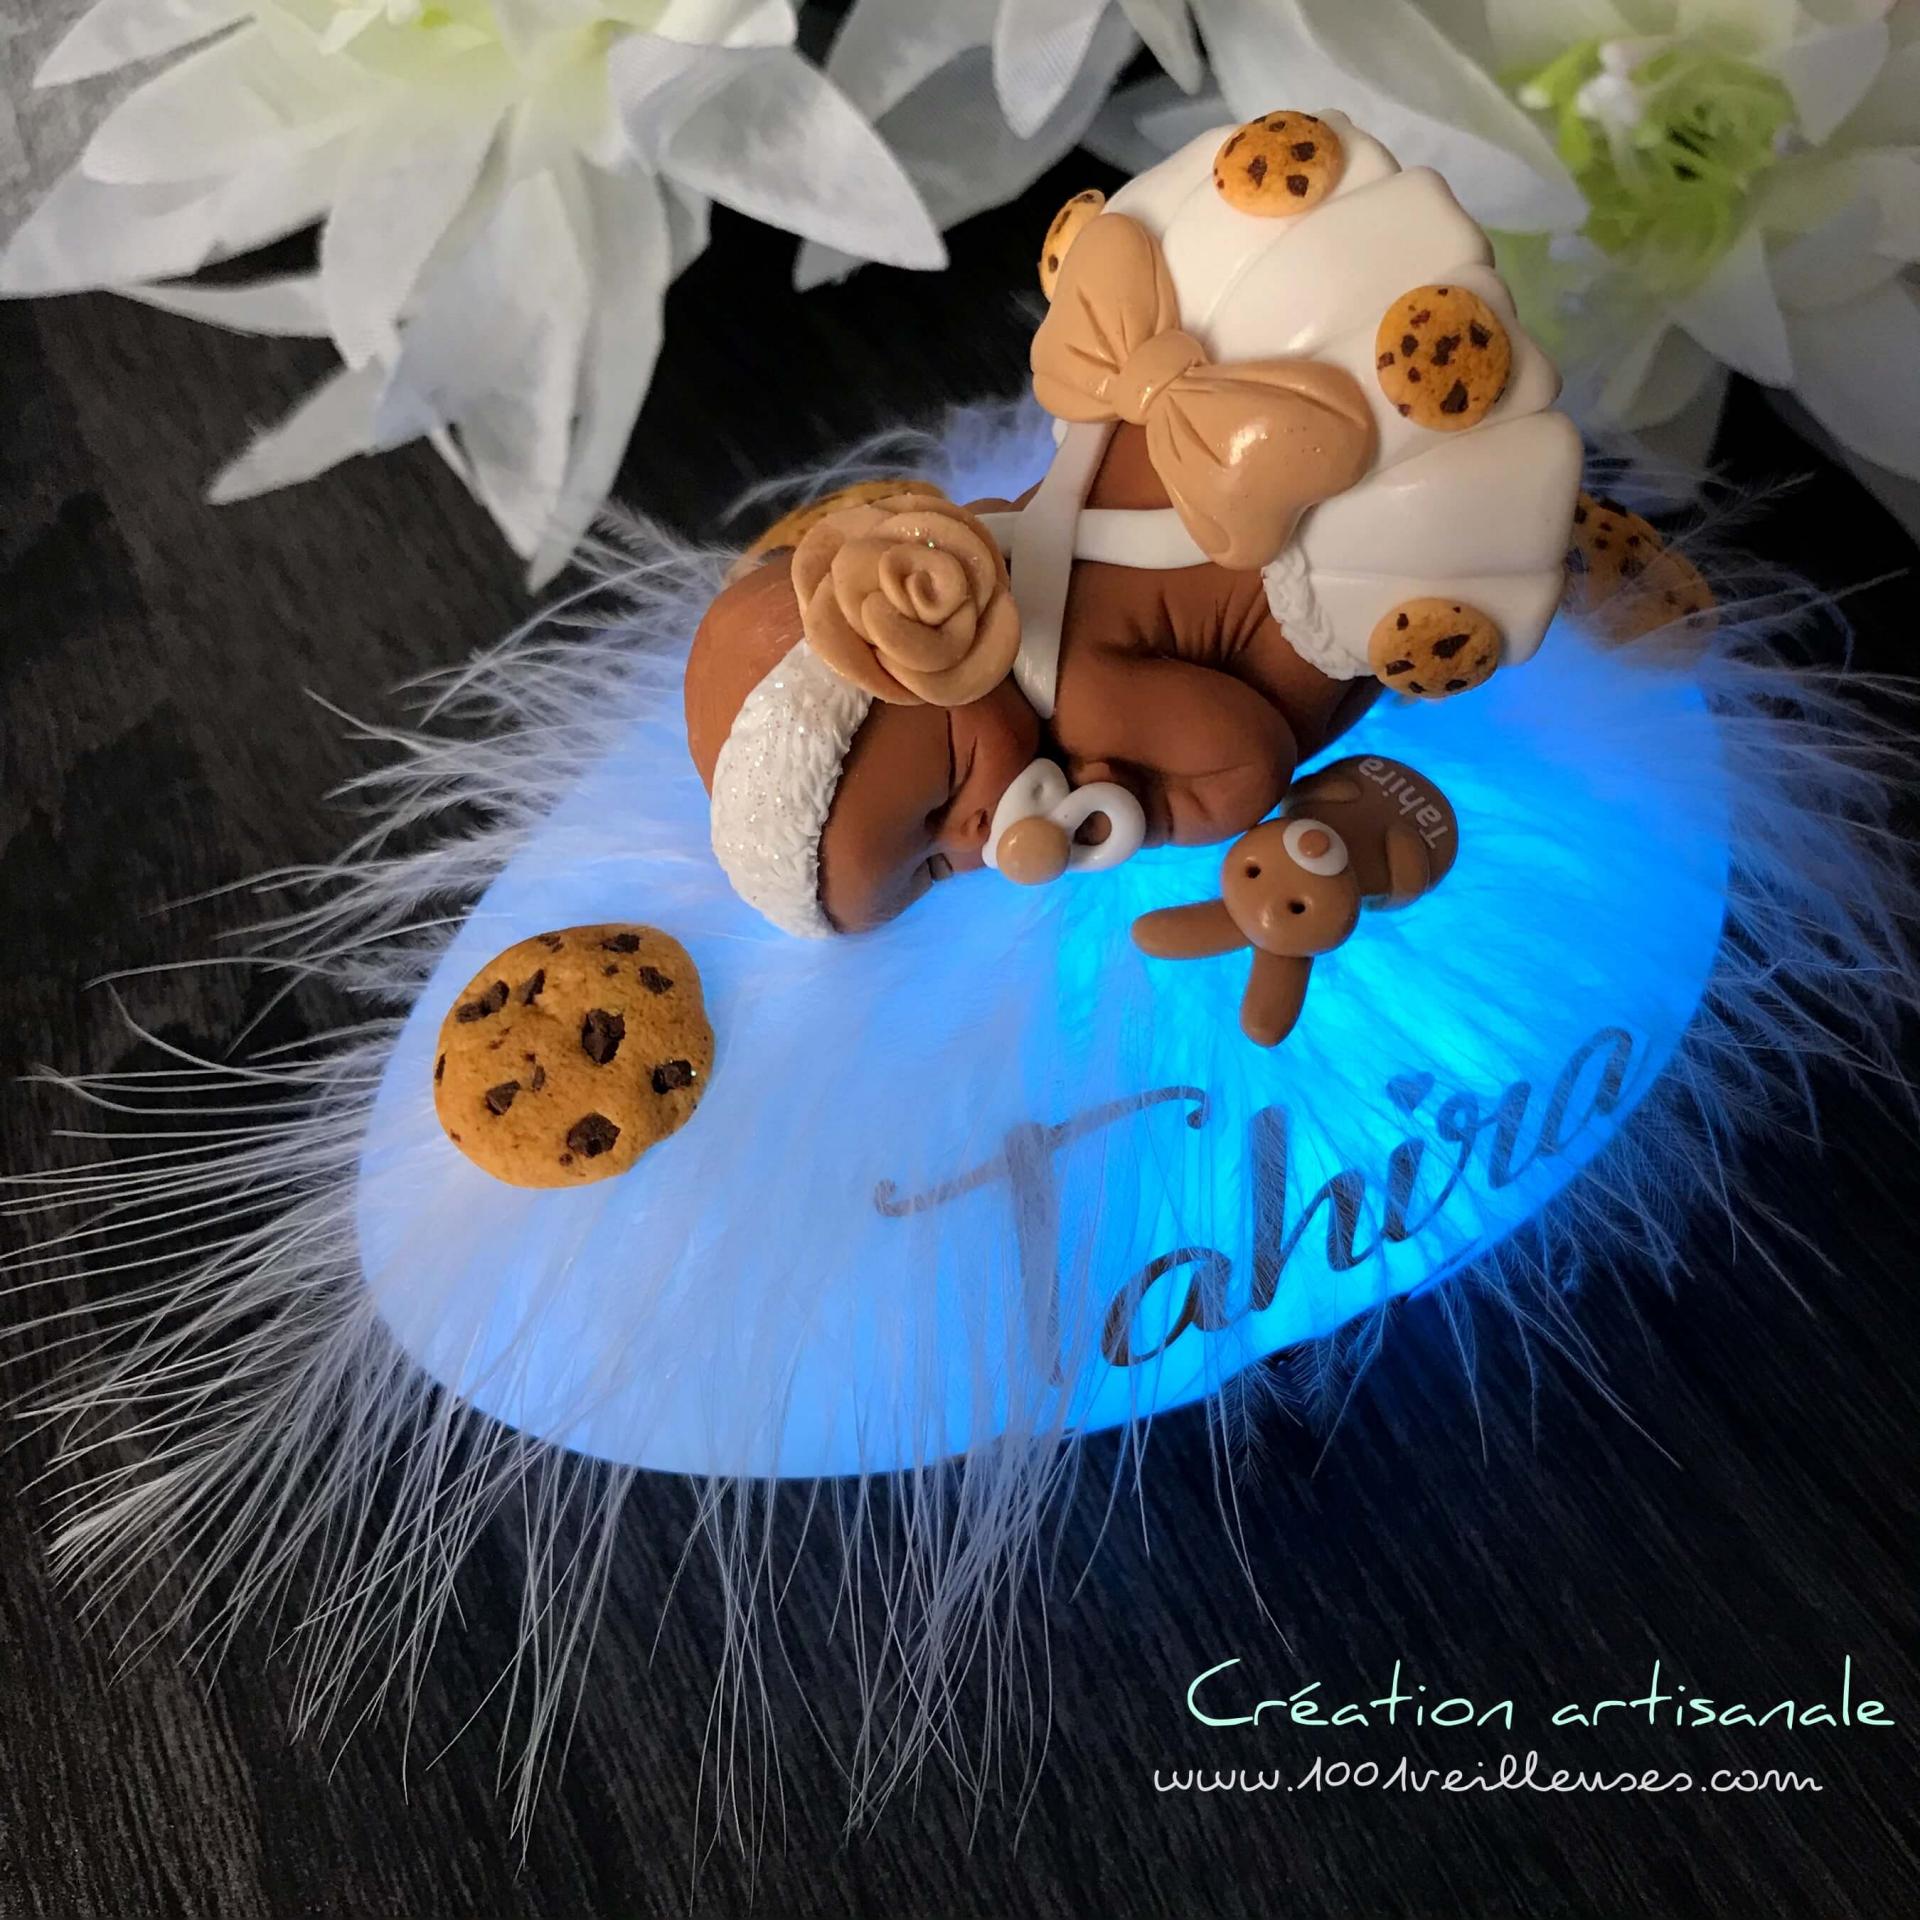 Personalized gift for baby with the compound name of a cookie-themed night light matching with its gift box to provide a unique keepsake